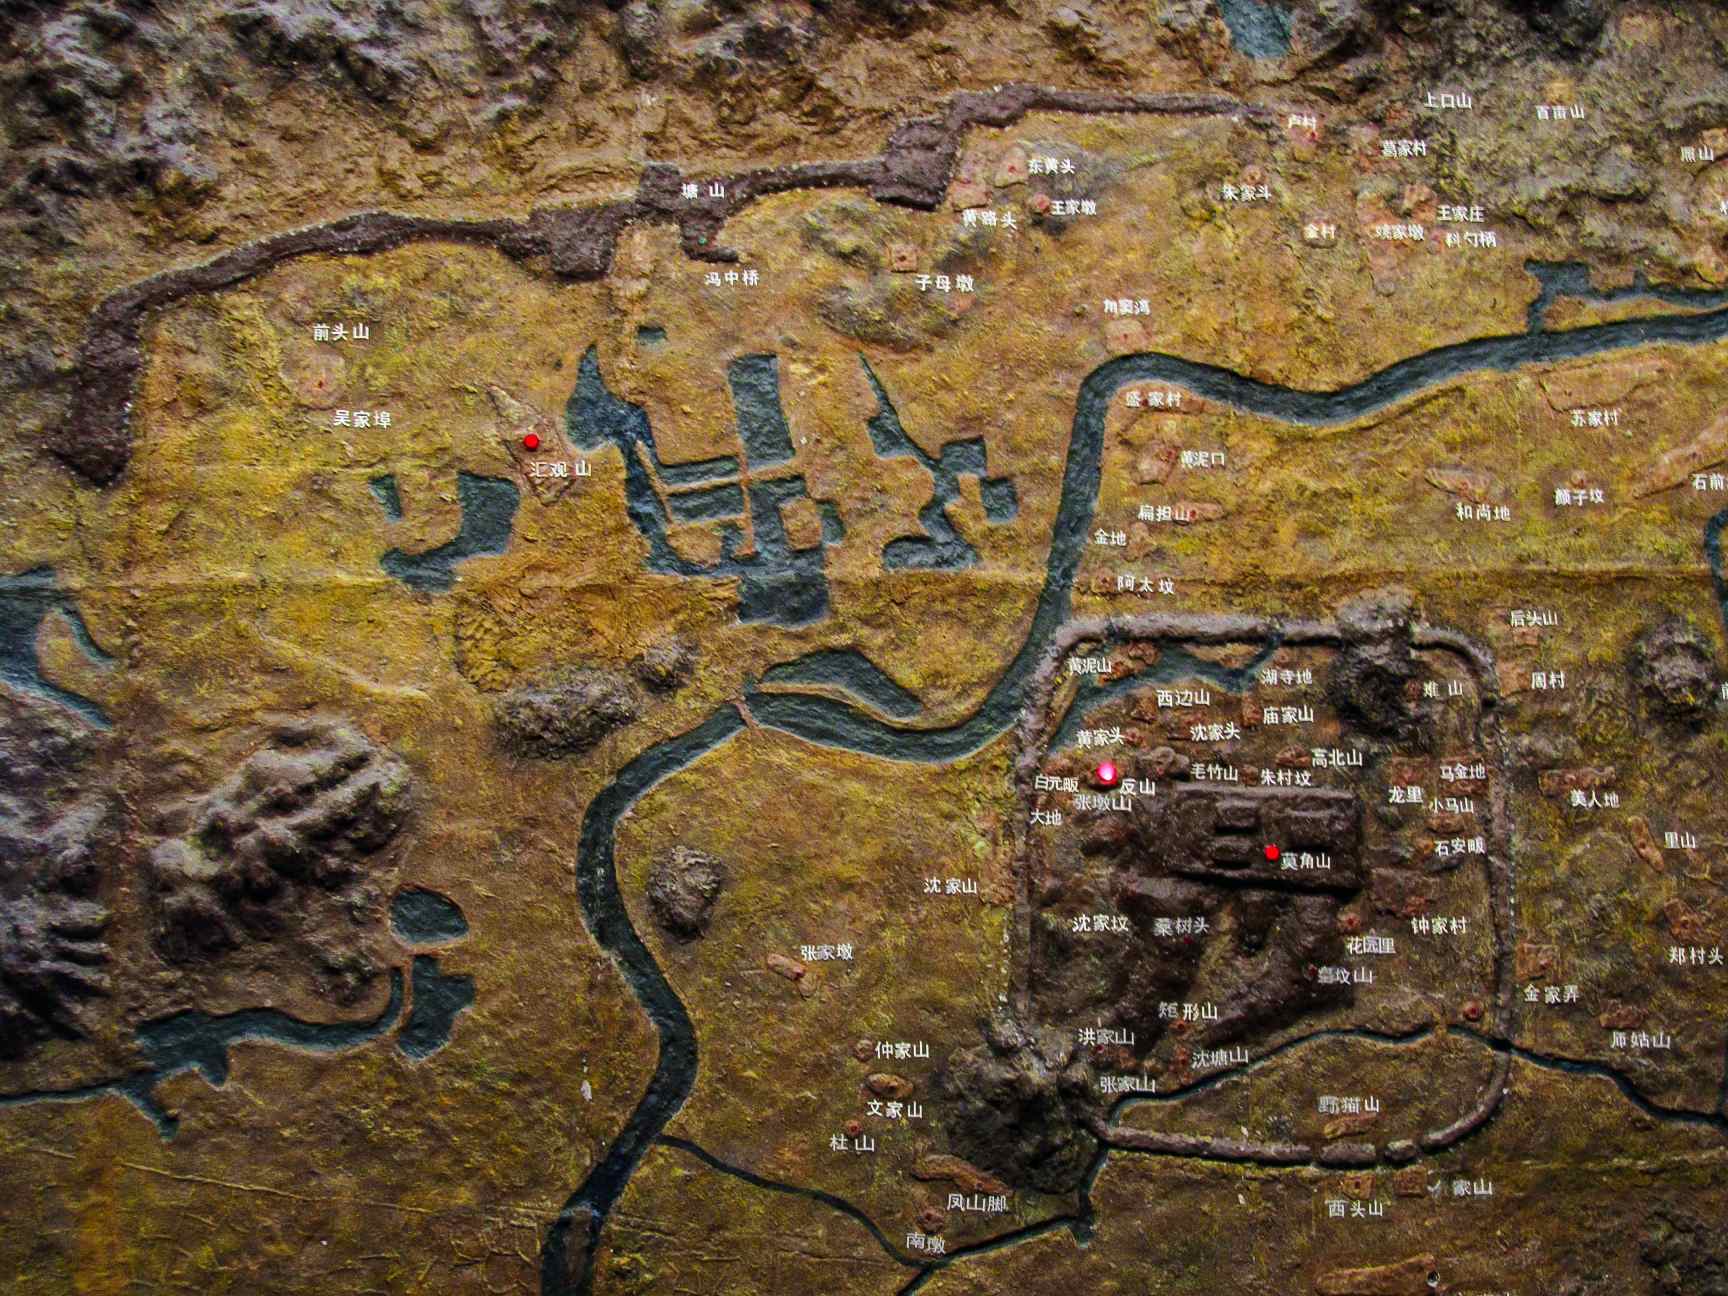 Model of the ancient city of Liangzhu, displayed in the Liangzhu Museum.